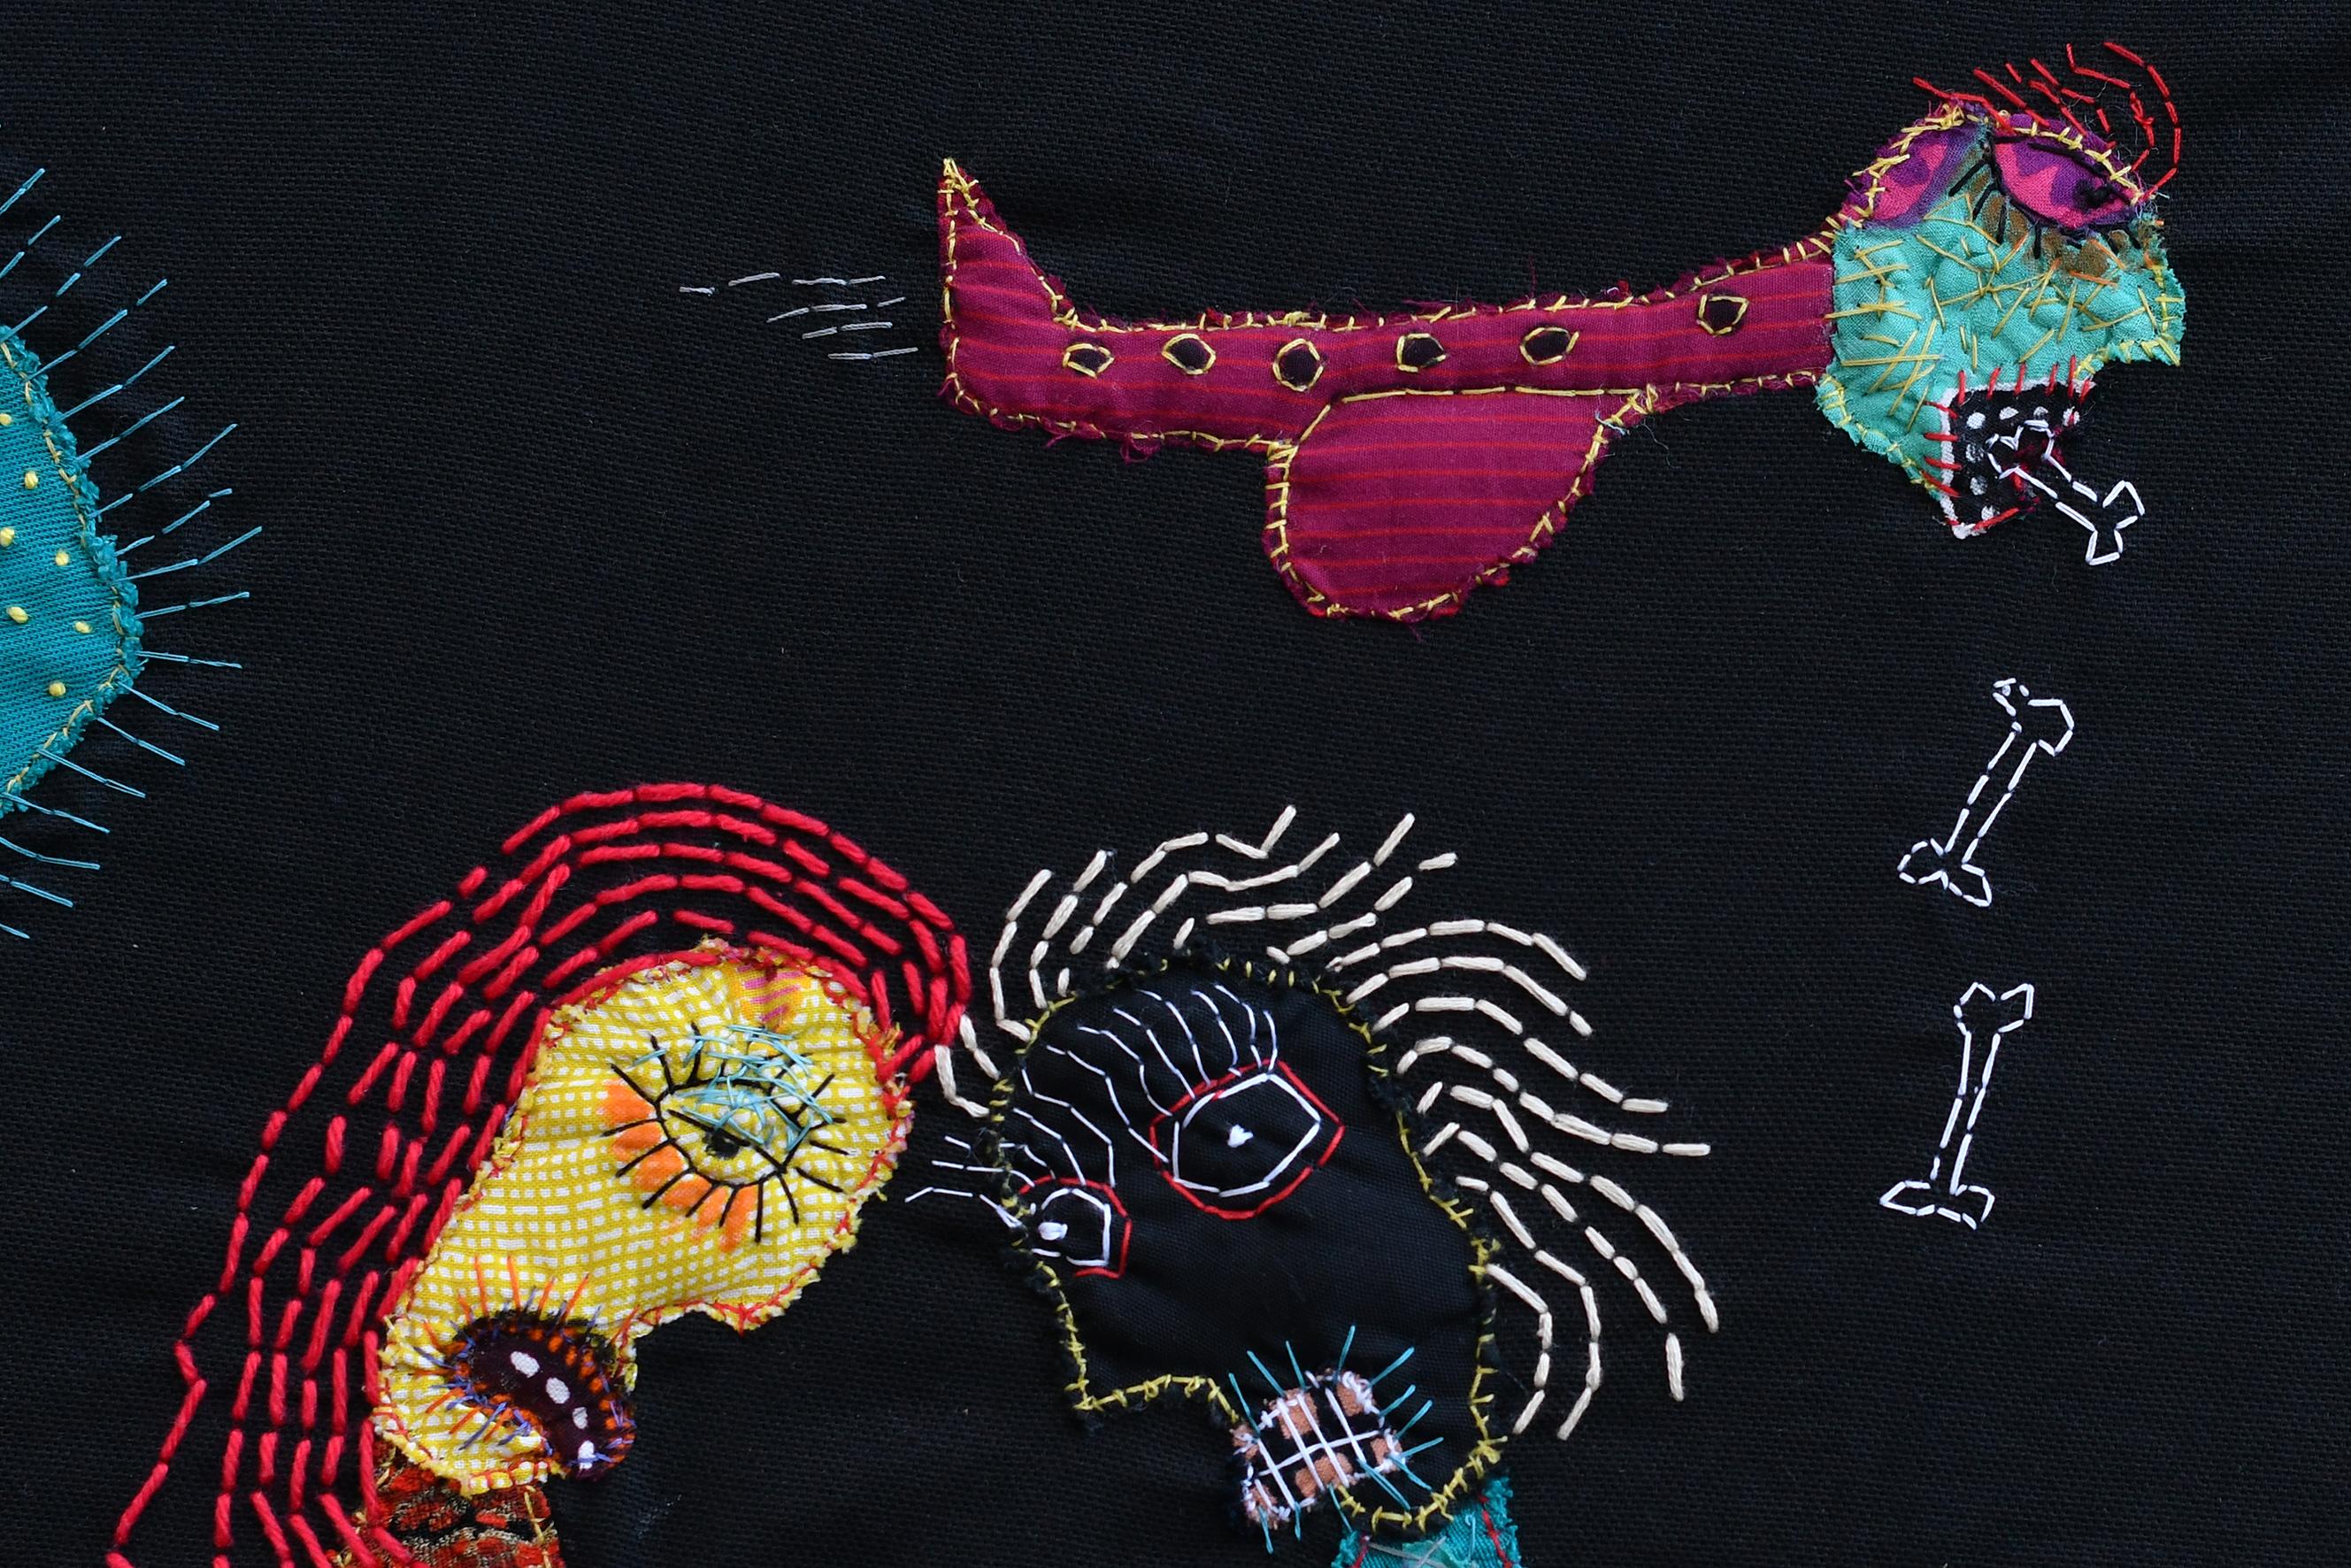 Créatures of the mined lands Barbara d'Antuono 21st Century textile outsider art en vente 1